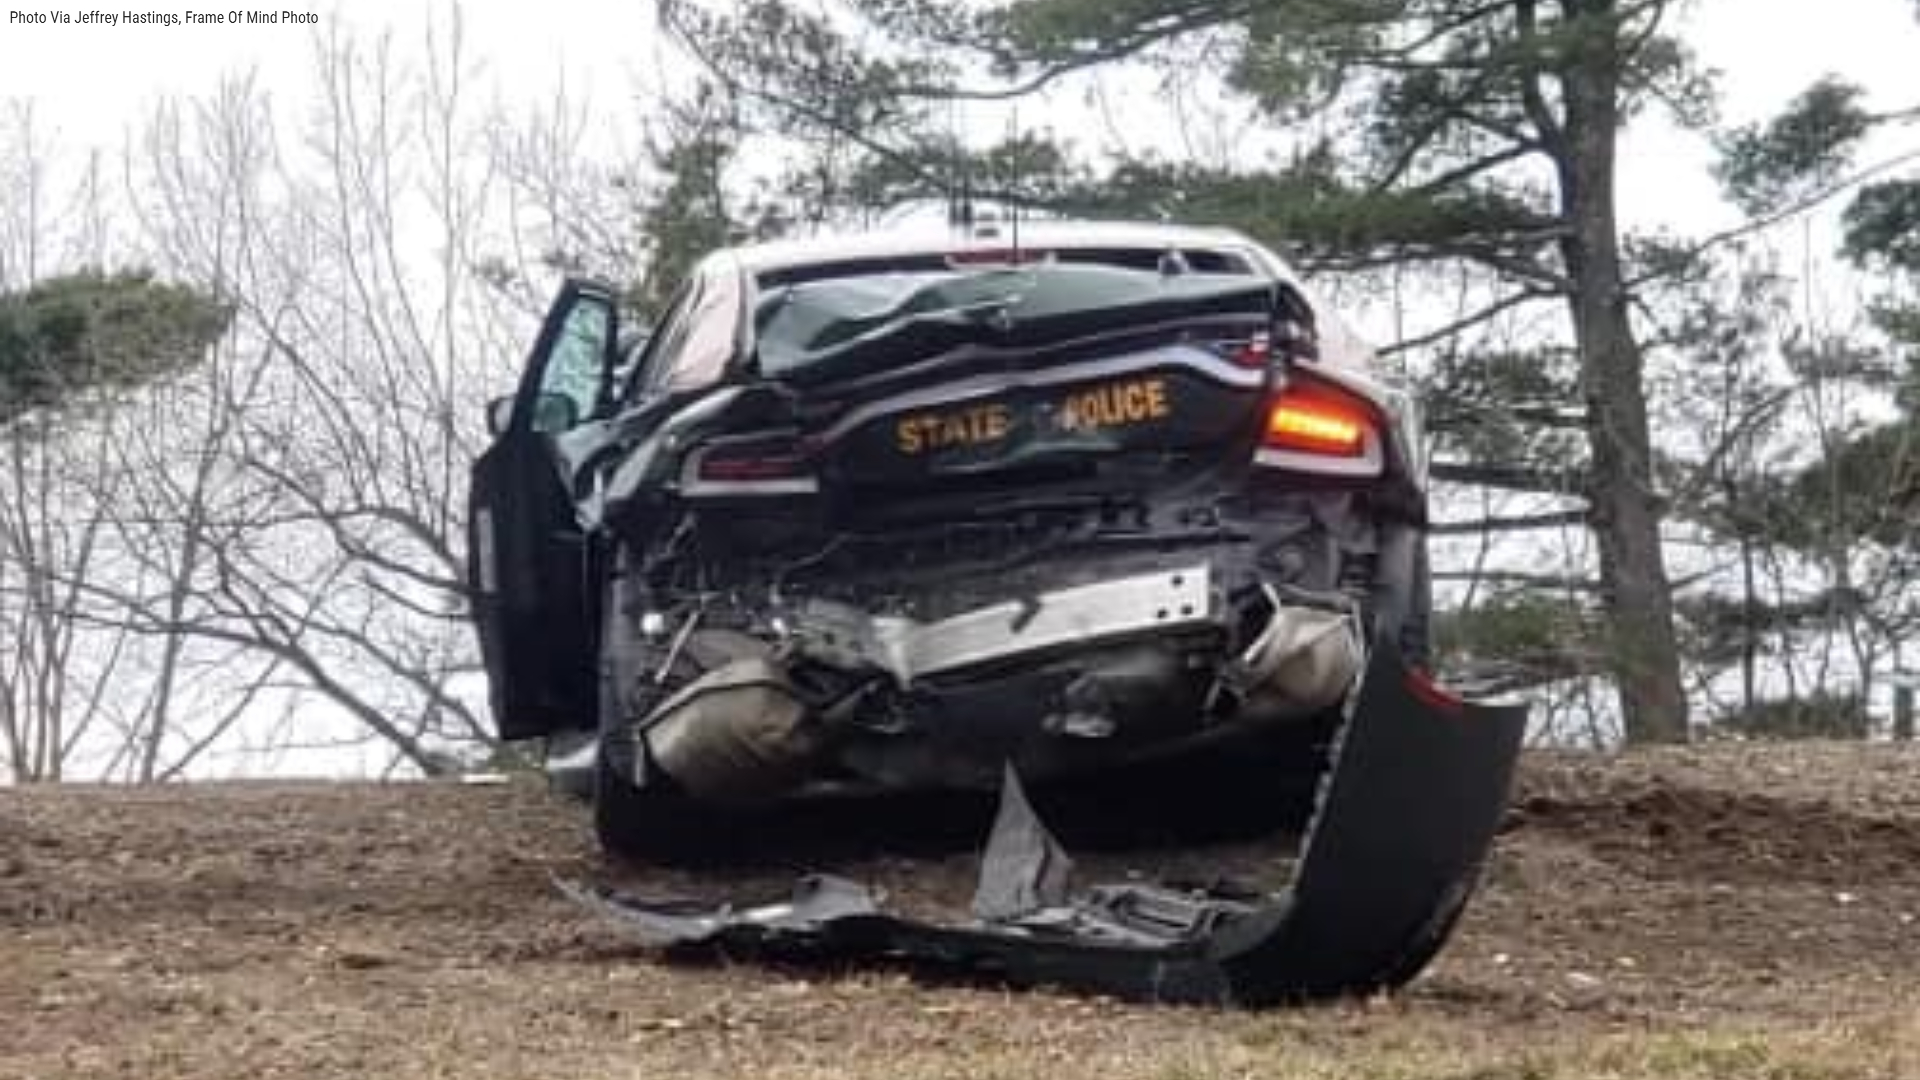 New Hampshire State Police Trooper Injured After Everett Turnpike Crash – CBS Boston